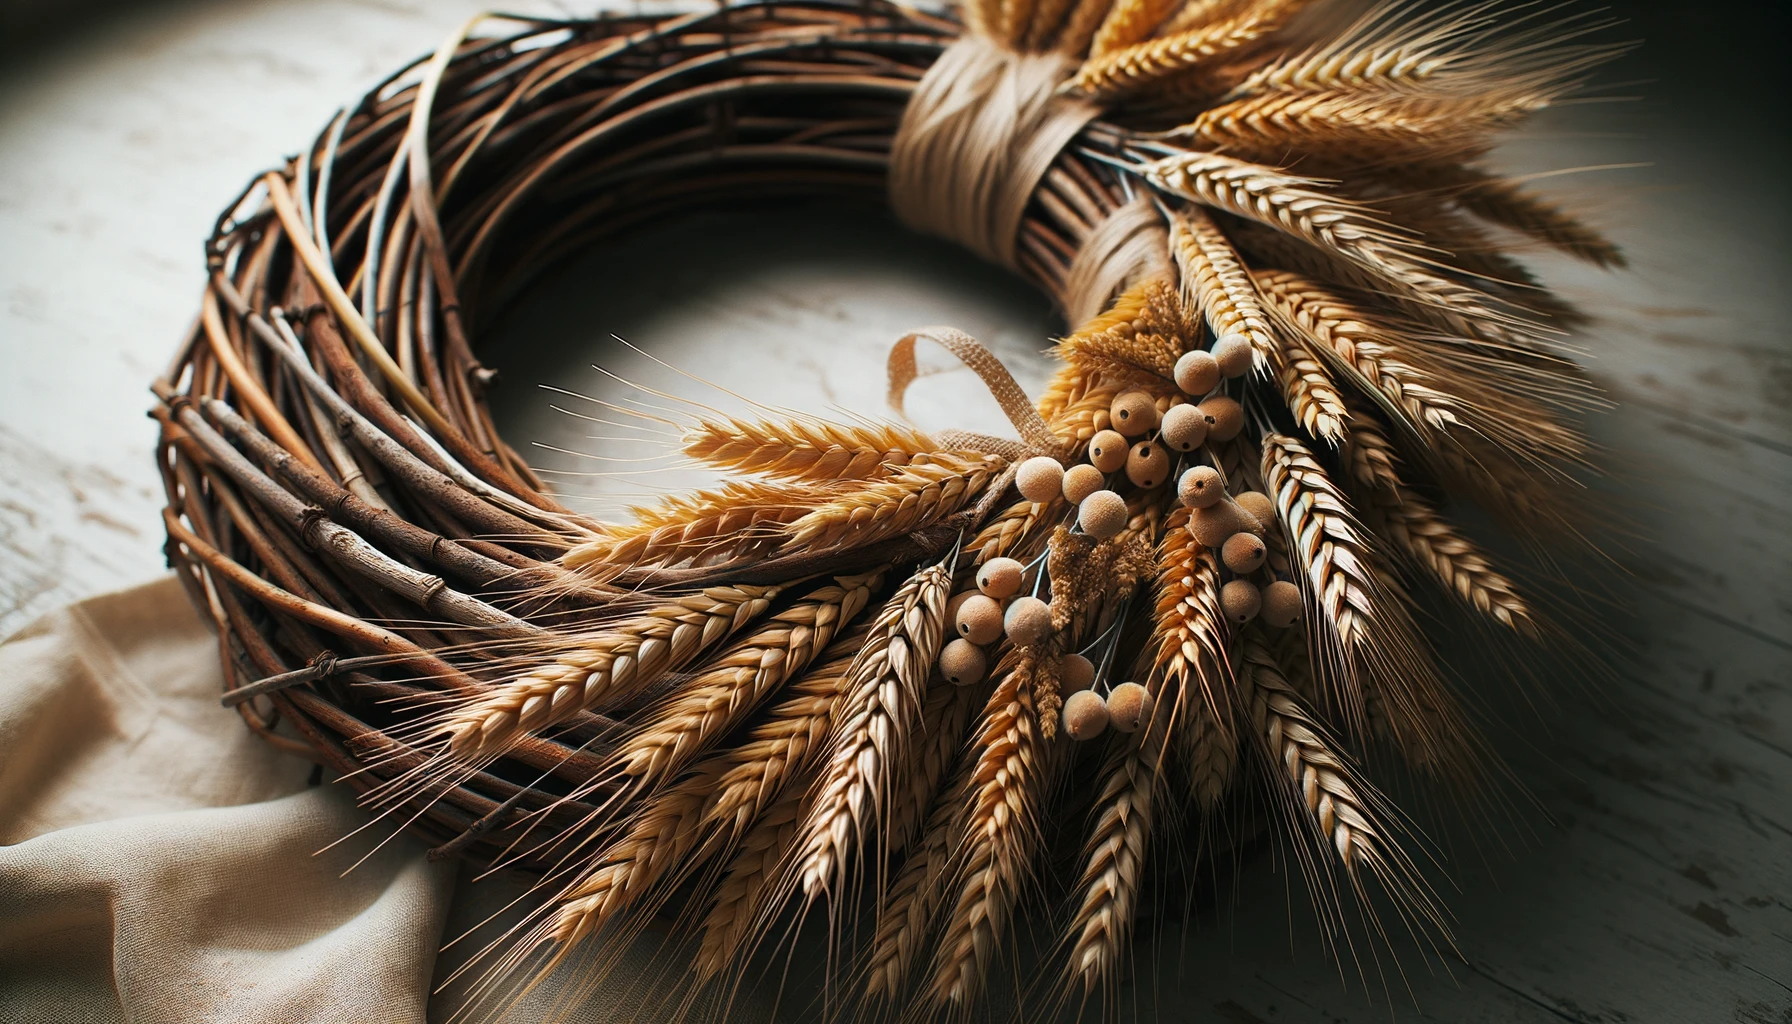 wheat stalks gathered on a grapevine wreath form